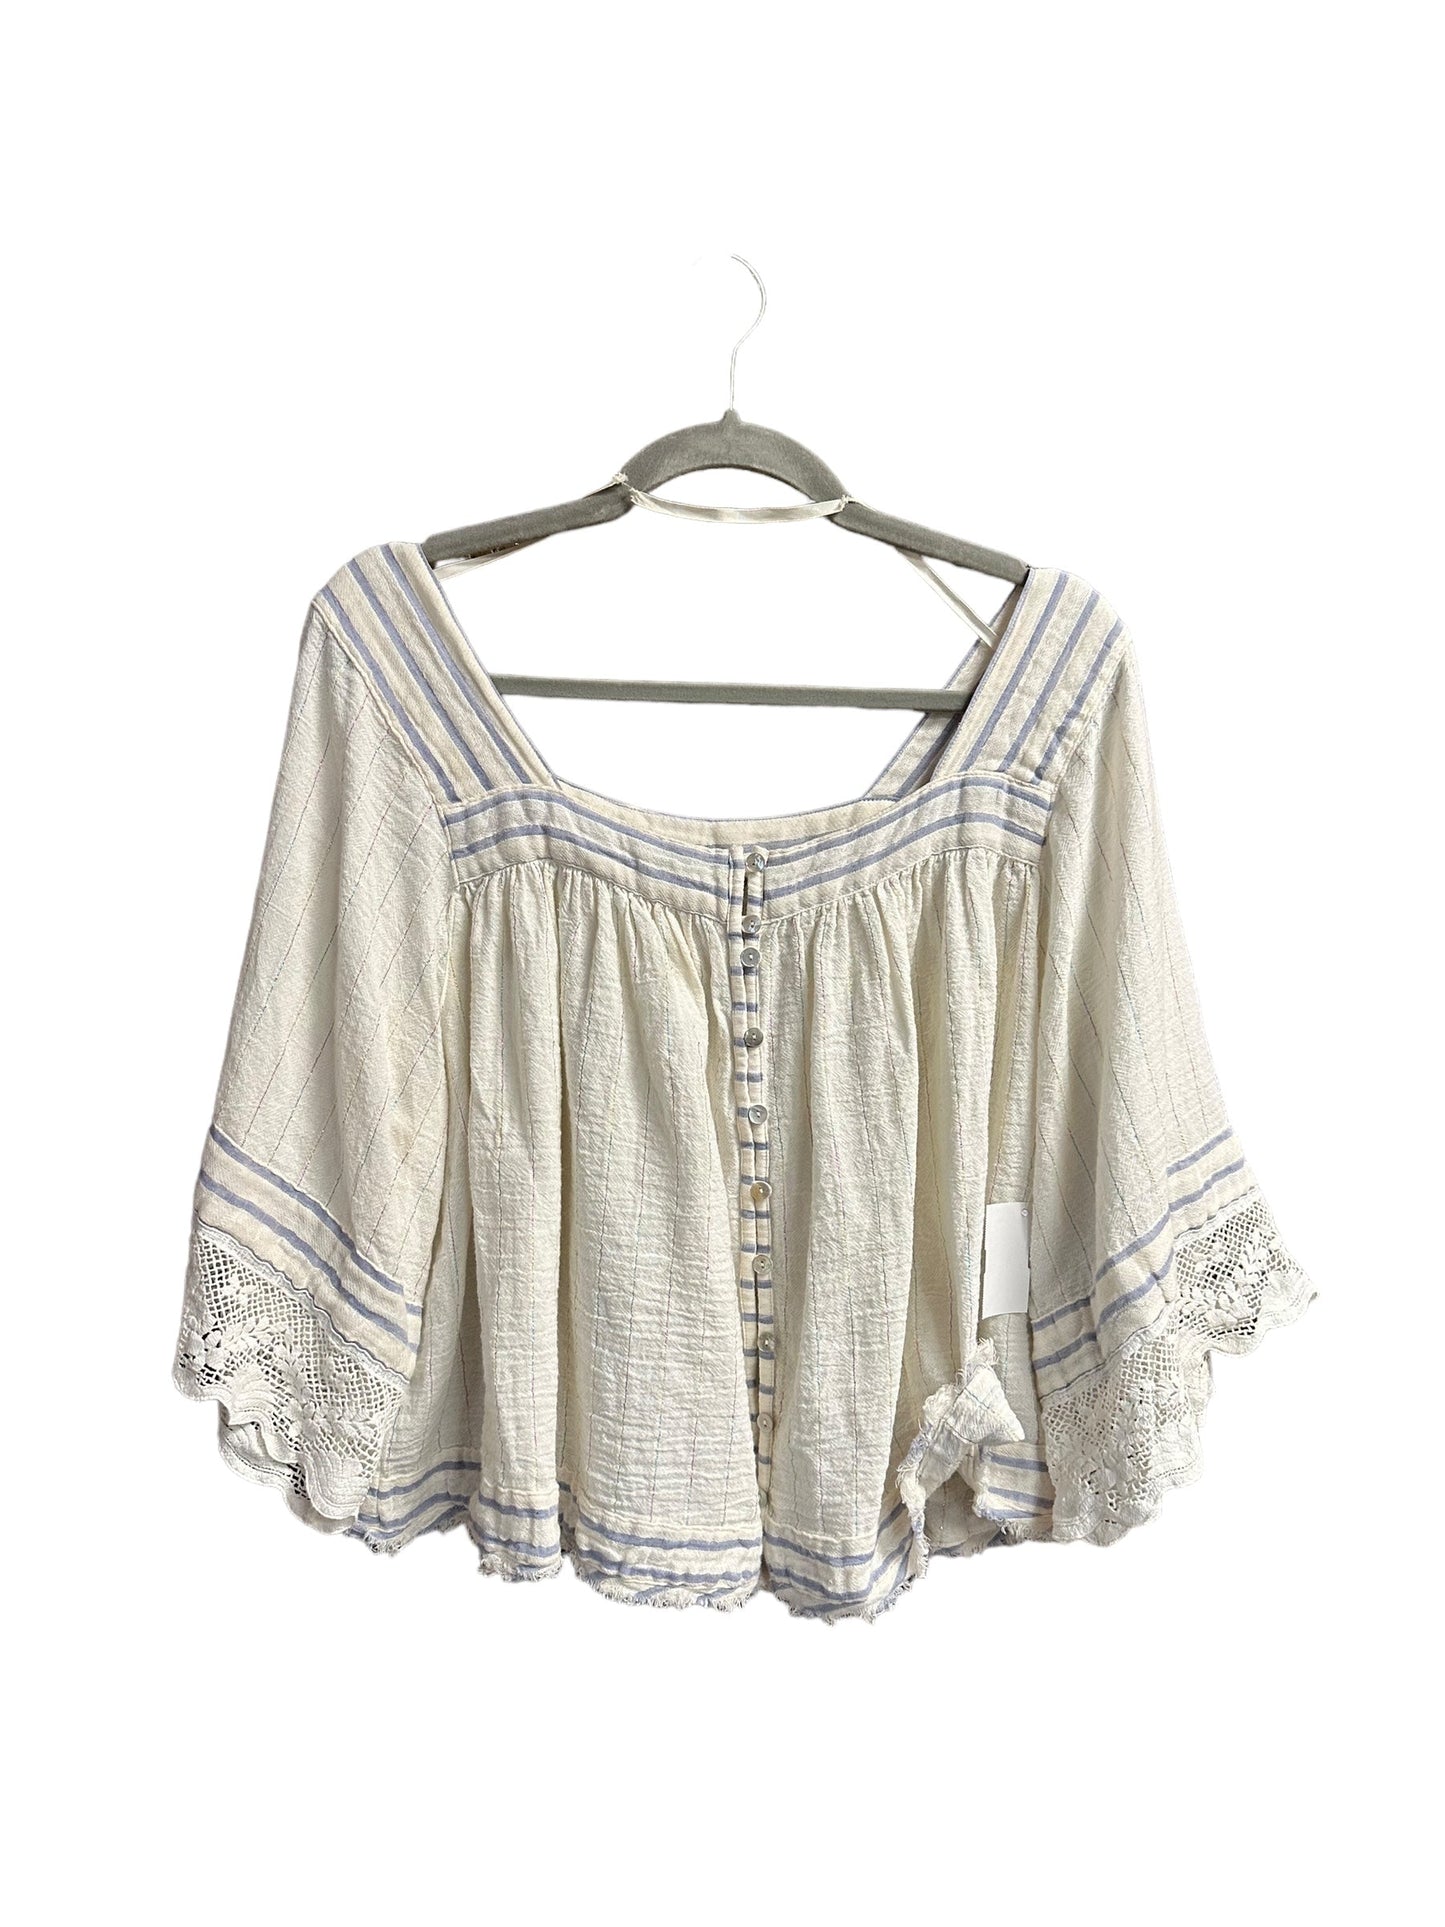 Blue & Cream Top Short Sleeve Free People, Size M